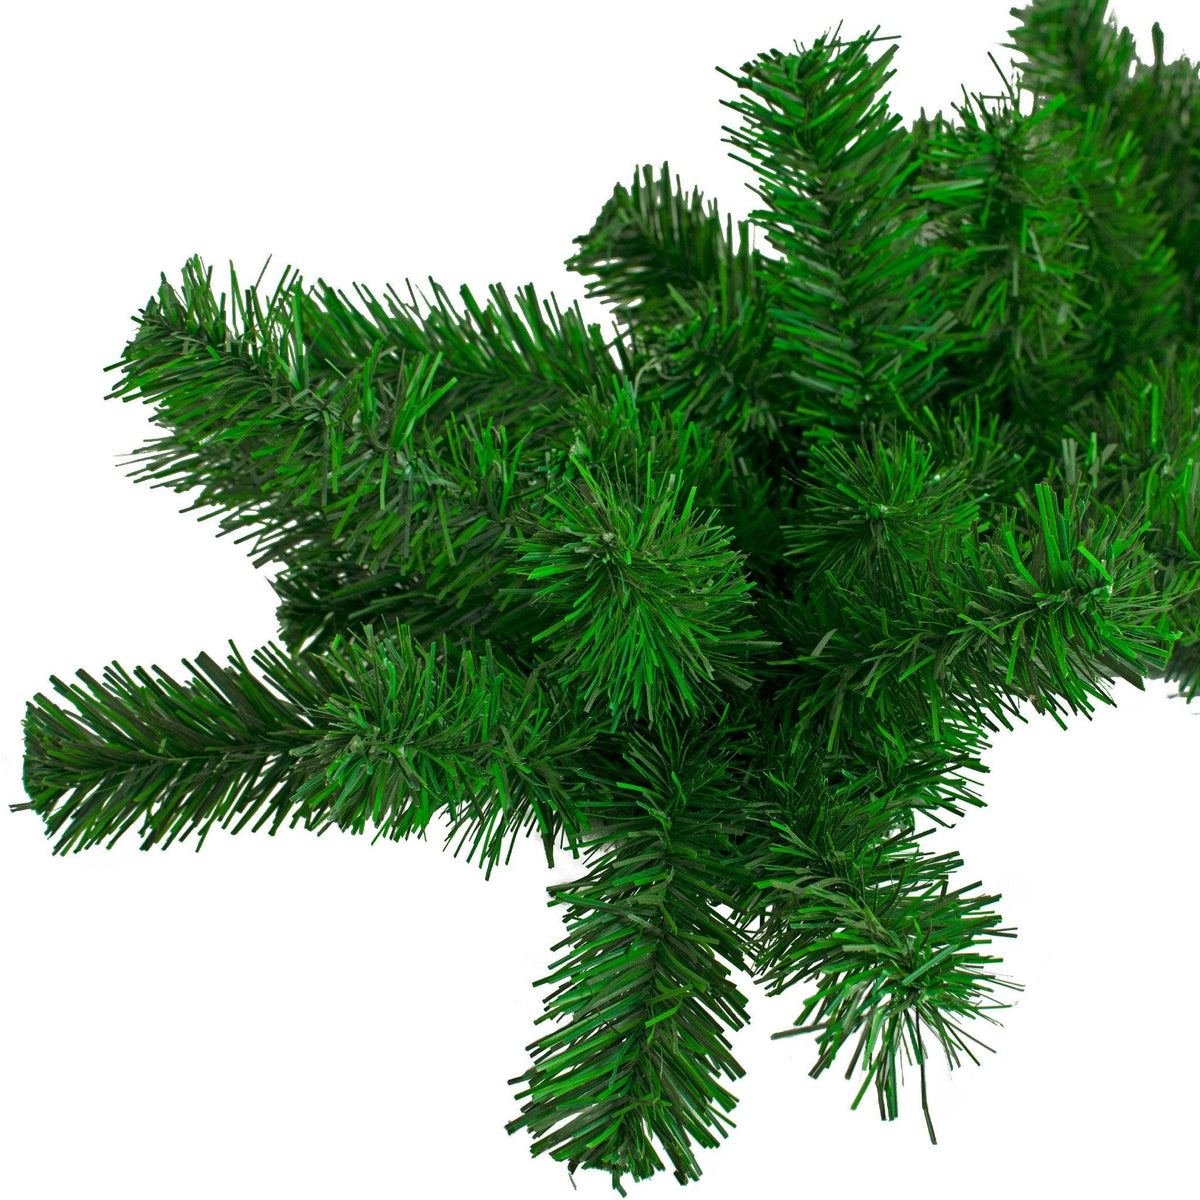 6FT Alpine Green Brush Garland on sale at leedisplay.com. Comes with unlit and undecorated.